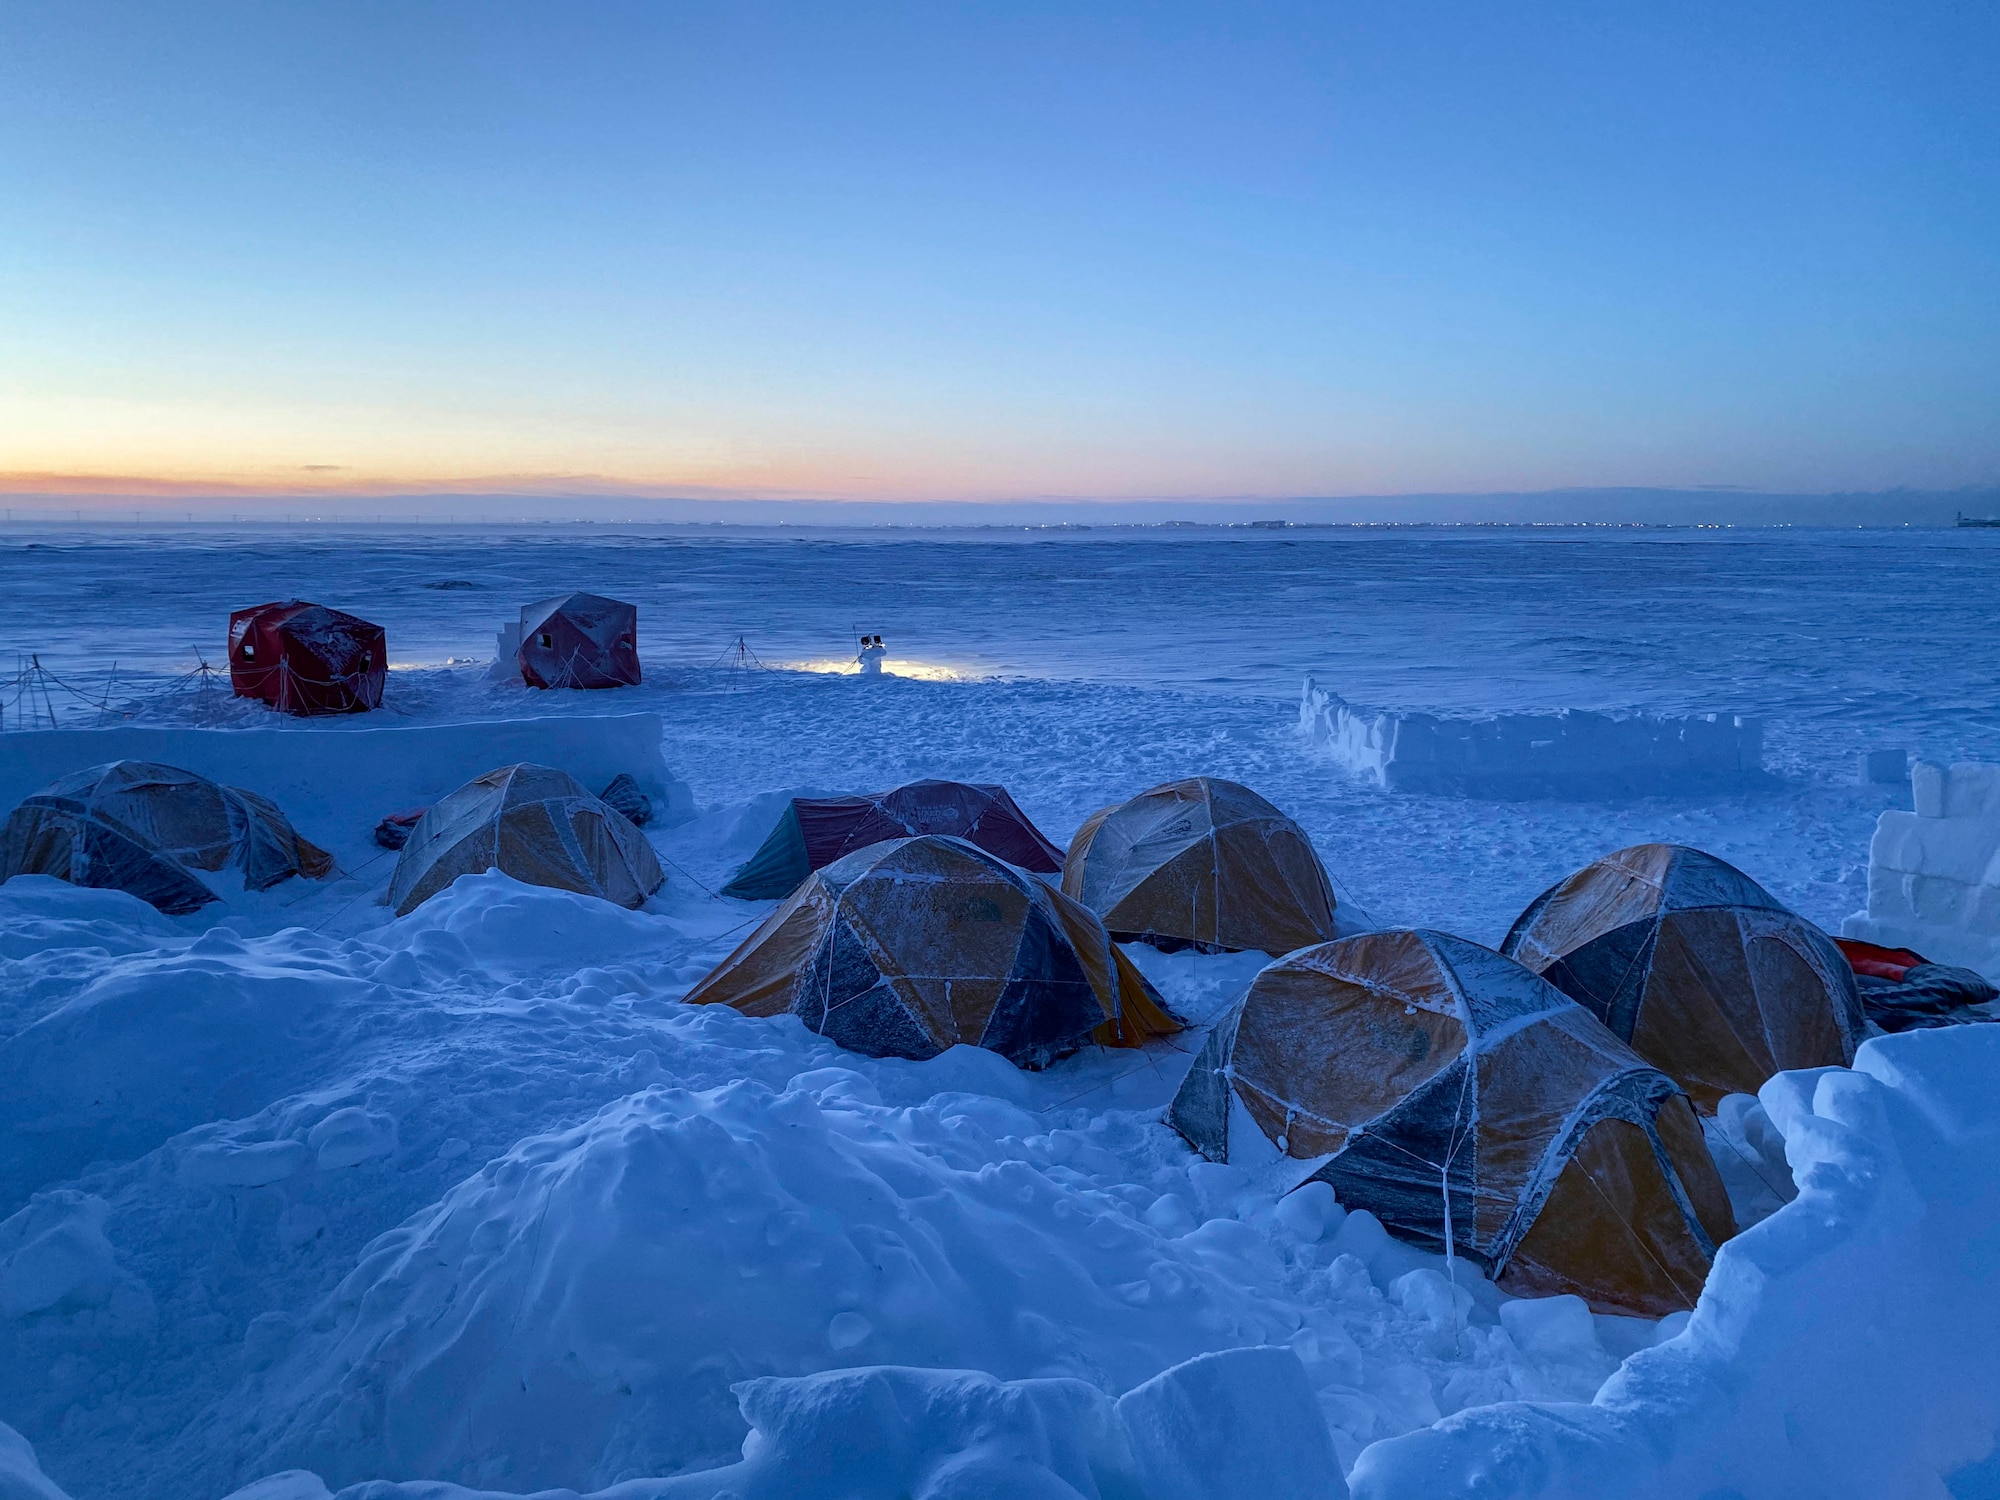 Survival, evasion, resistance and escape (SERE) specialists going through upgrade training stay over in tents at Utqiaġvik (Barrow), Alaska, Jan. 13, 2021.